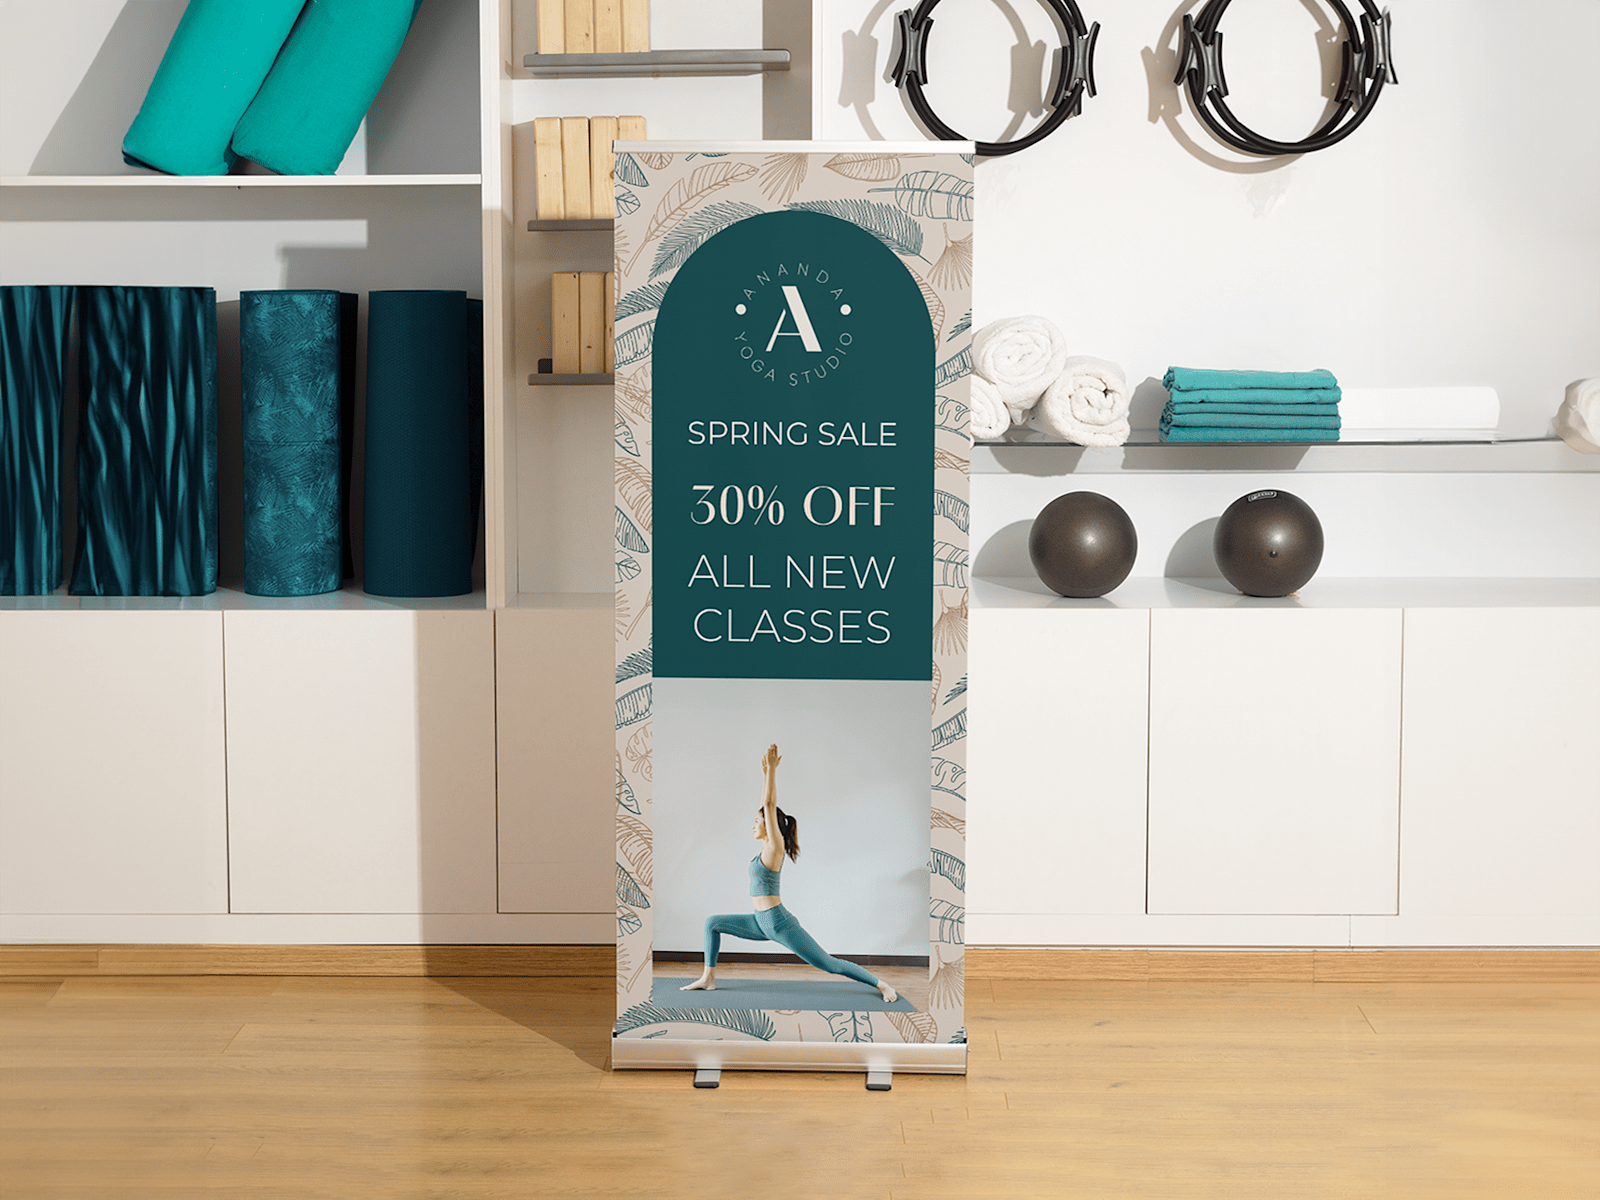 Pull-up banner advertising a professional trainer service, placed inside a sports shop. 